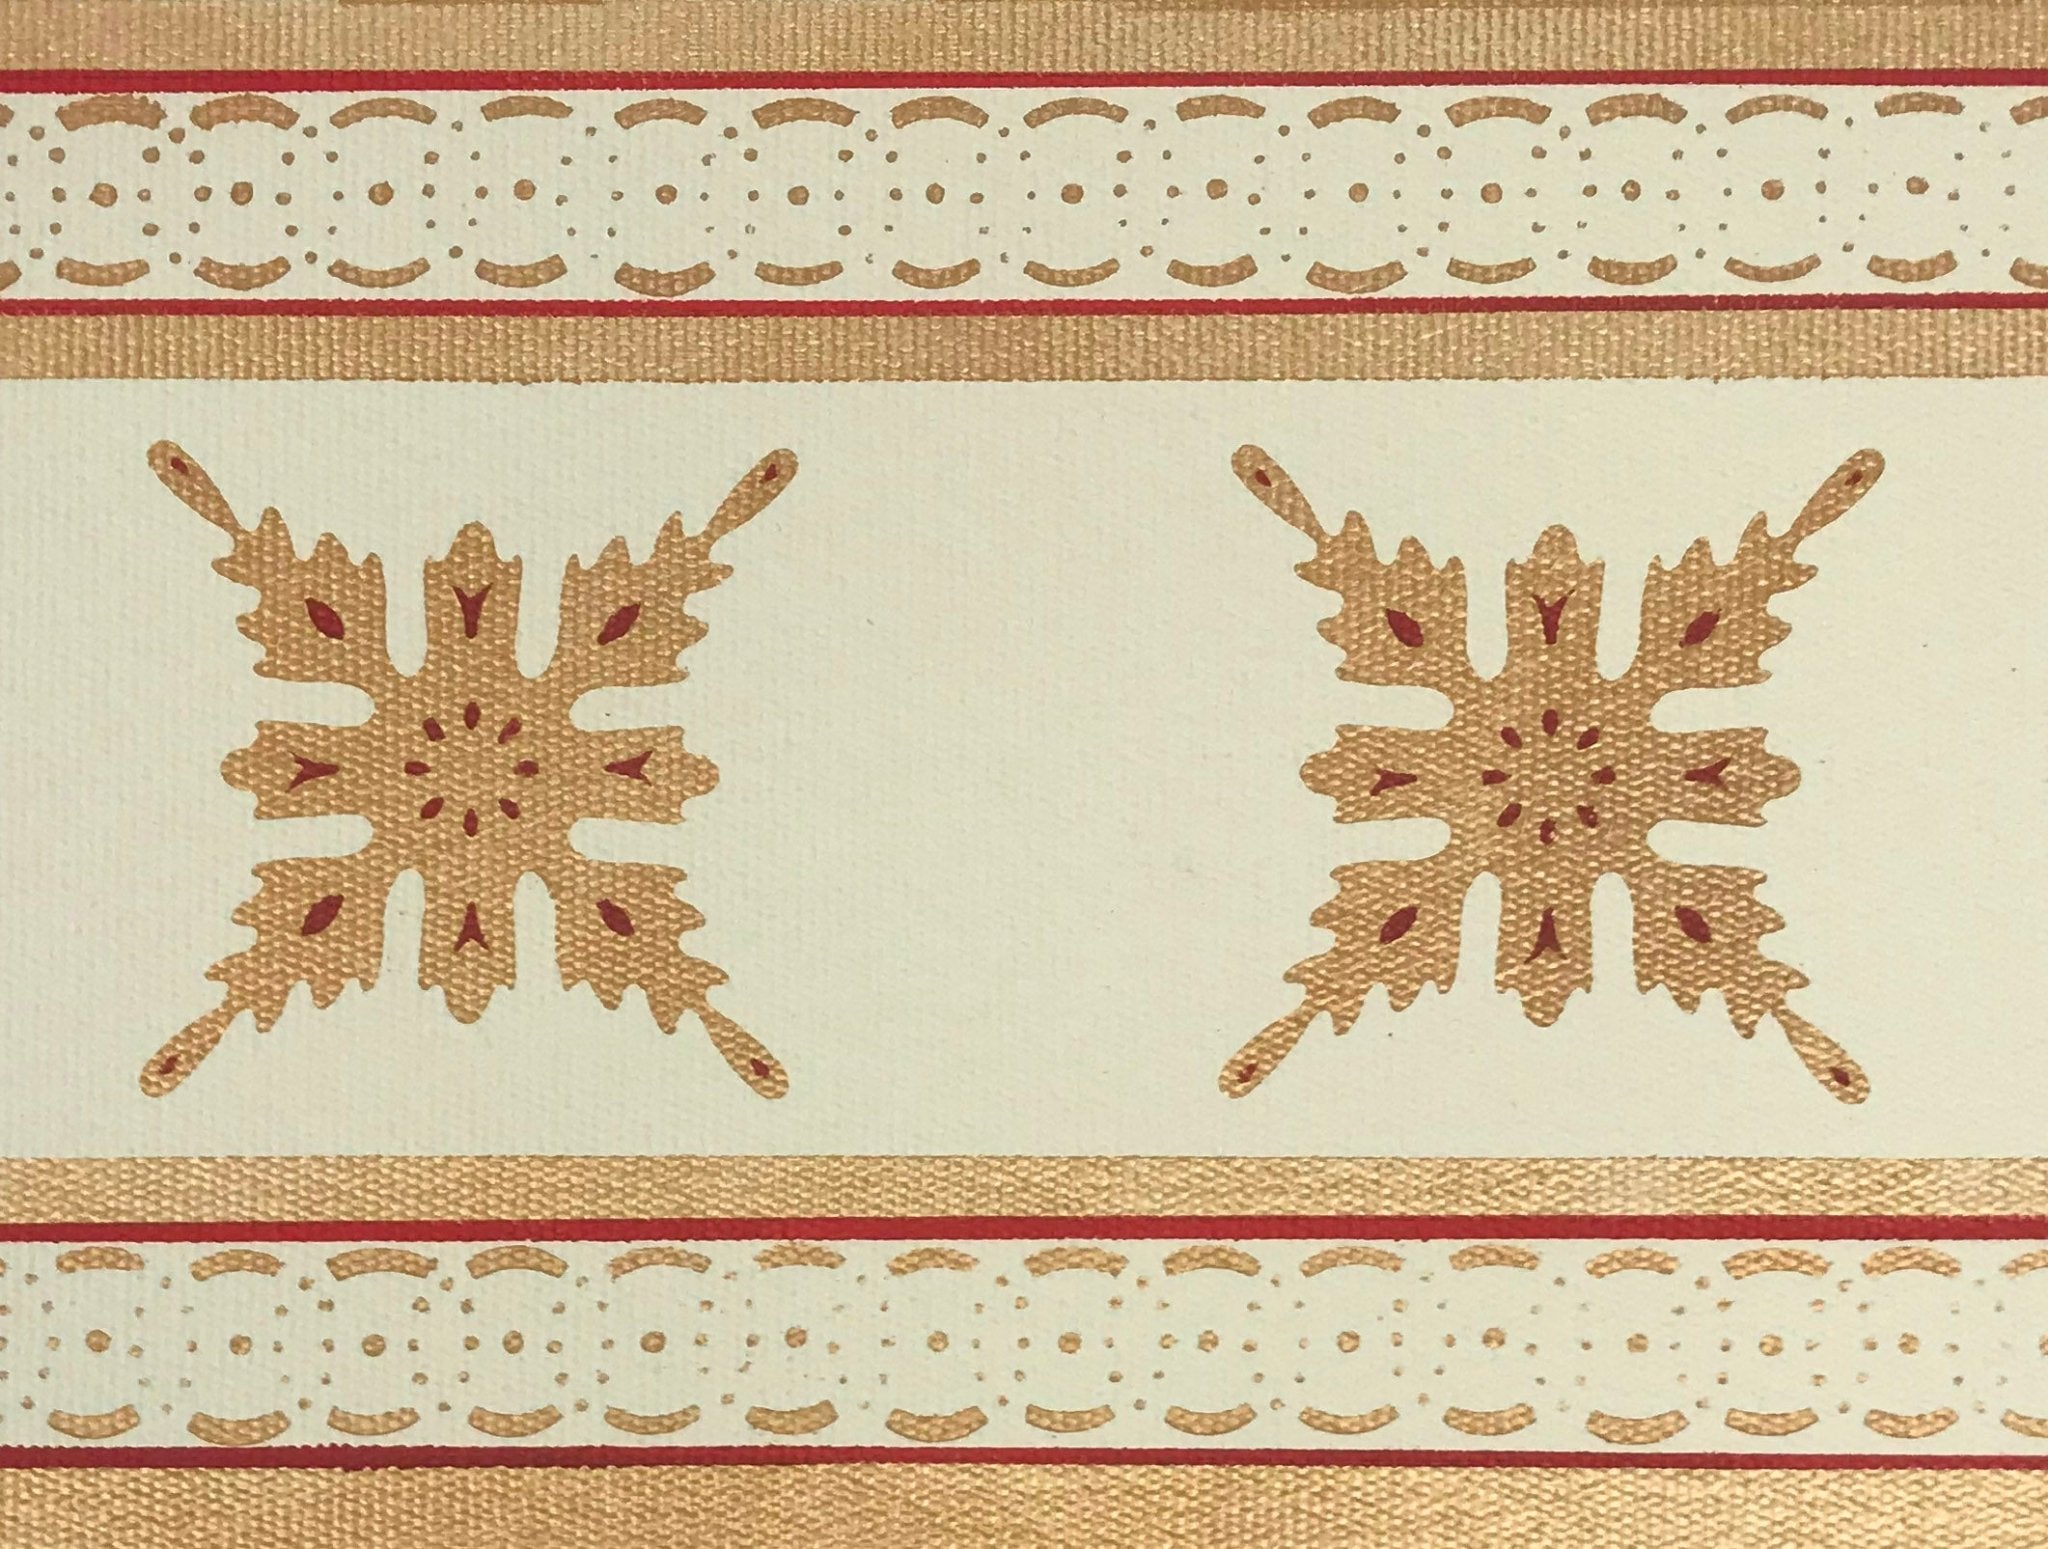 Close up of the border of this floorcloth showing the border which is a combination of elements from the interior motifs, lines and a complimentary circle and dot pattern.